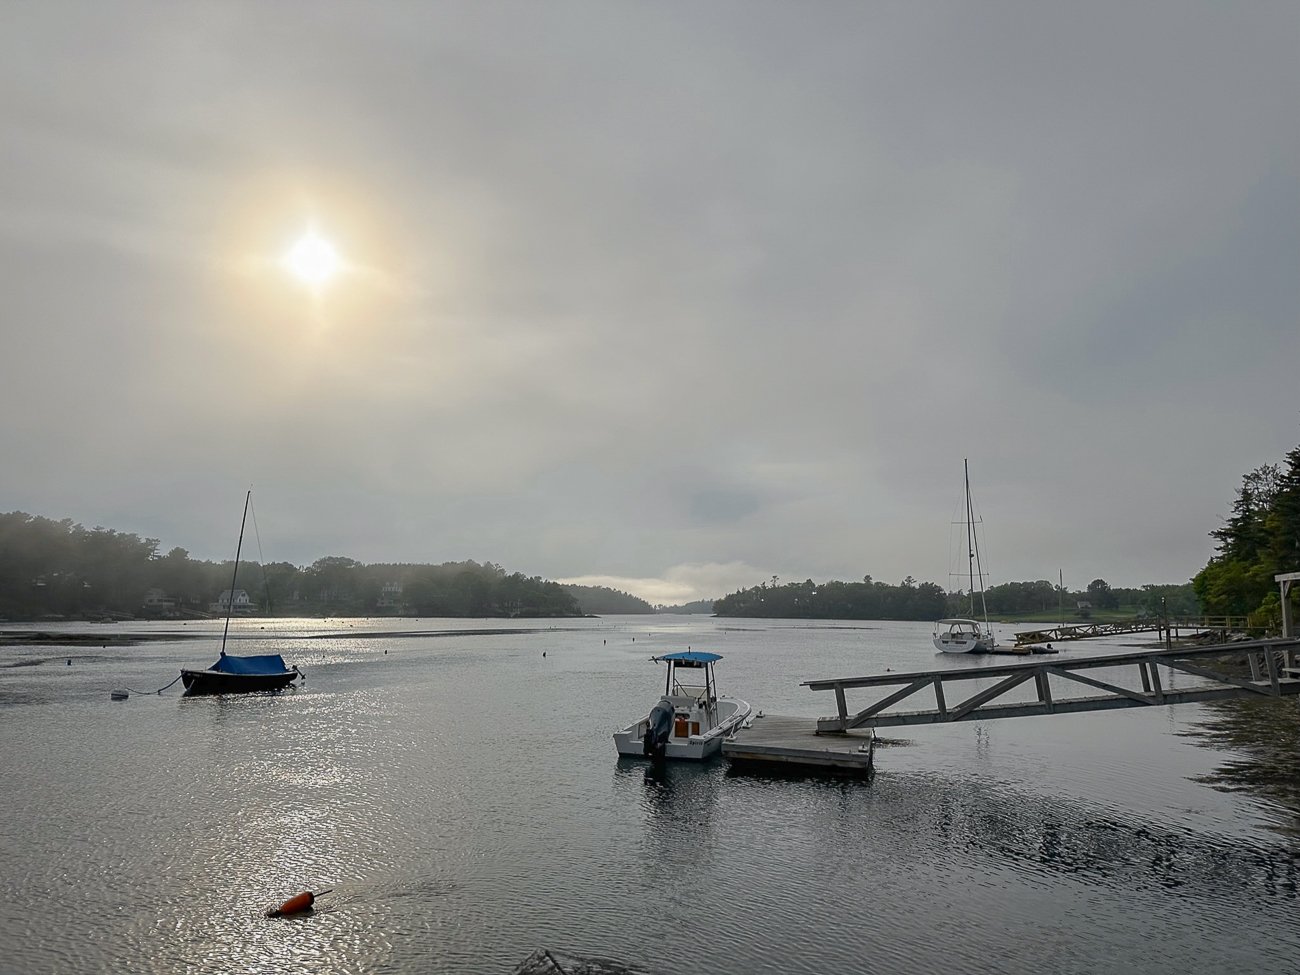 A view of an ocean inlet in Southport, Maine with private docks and small docked boats and buoys